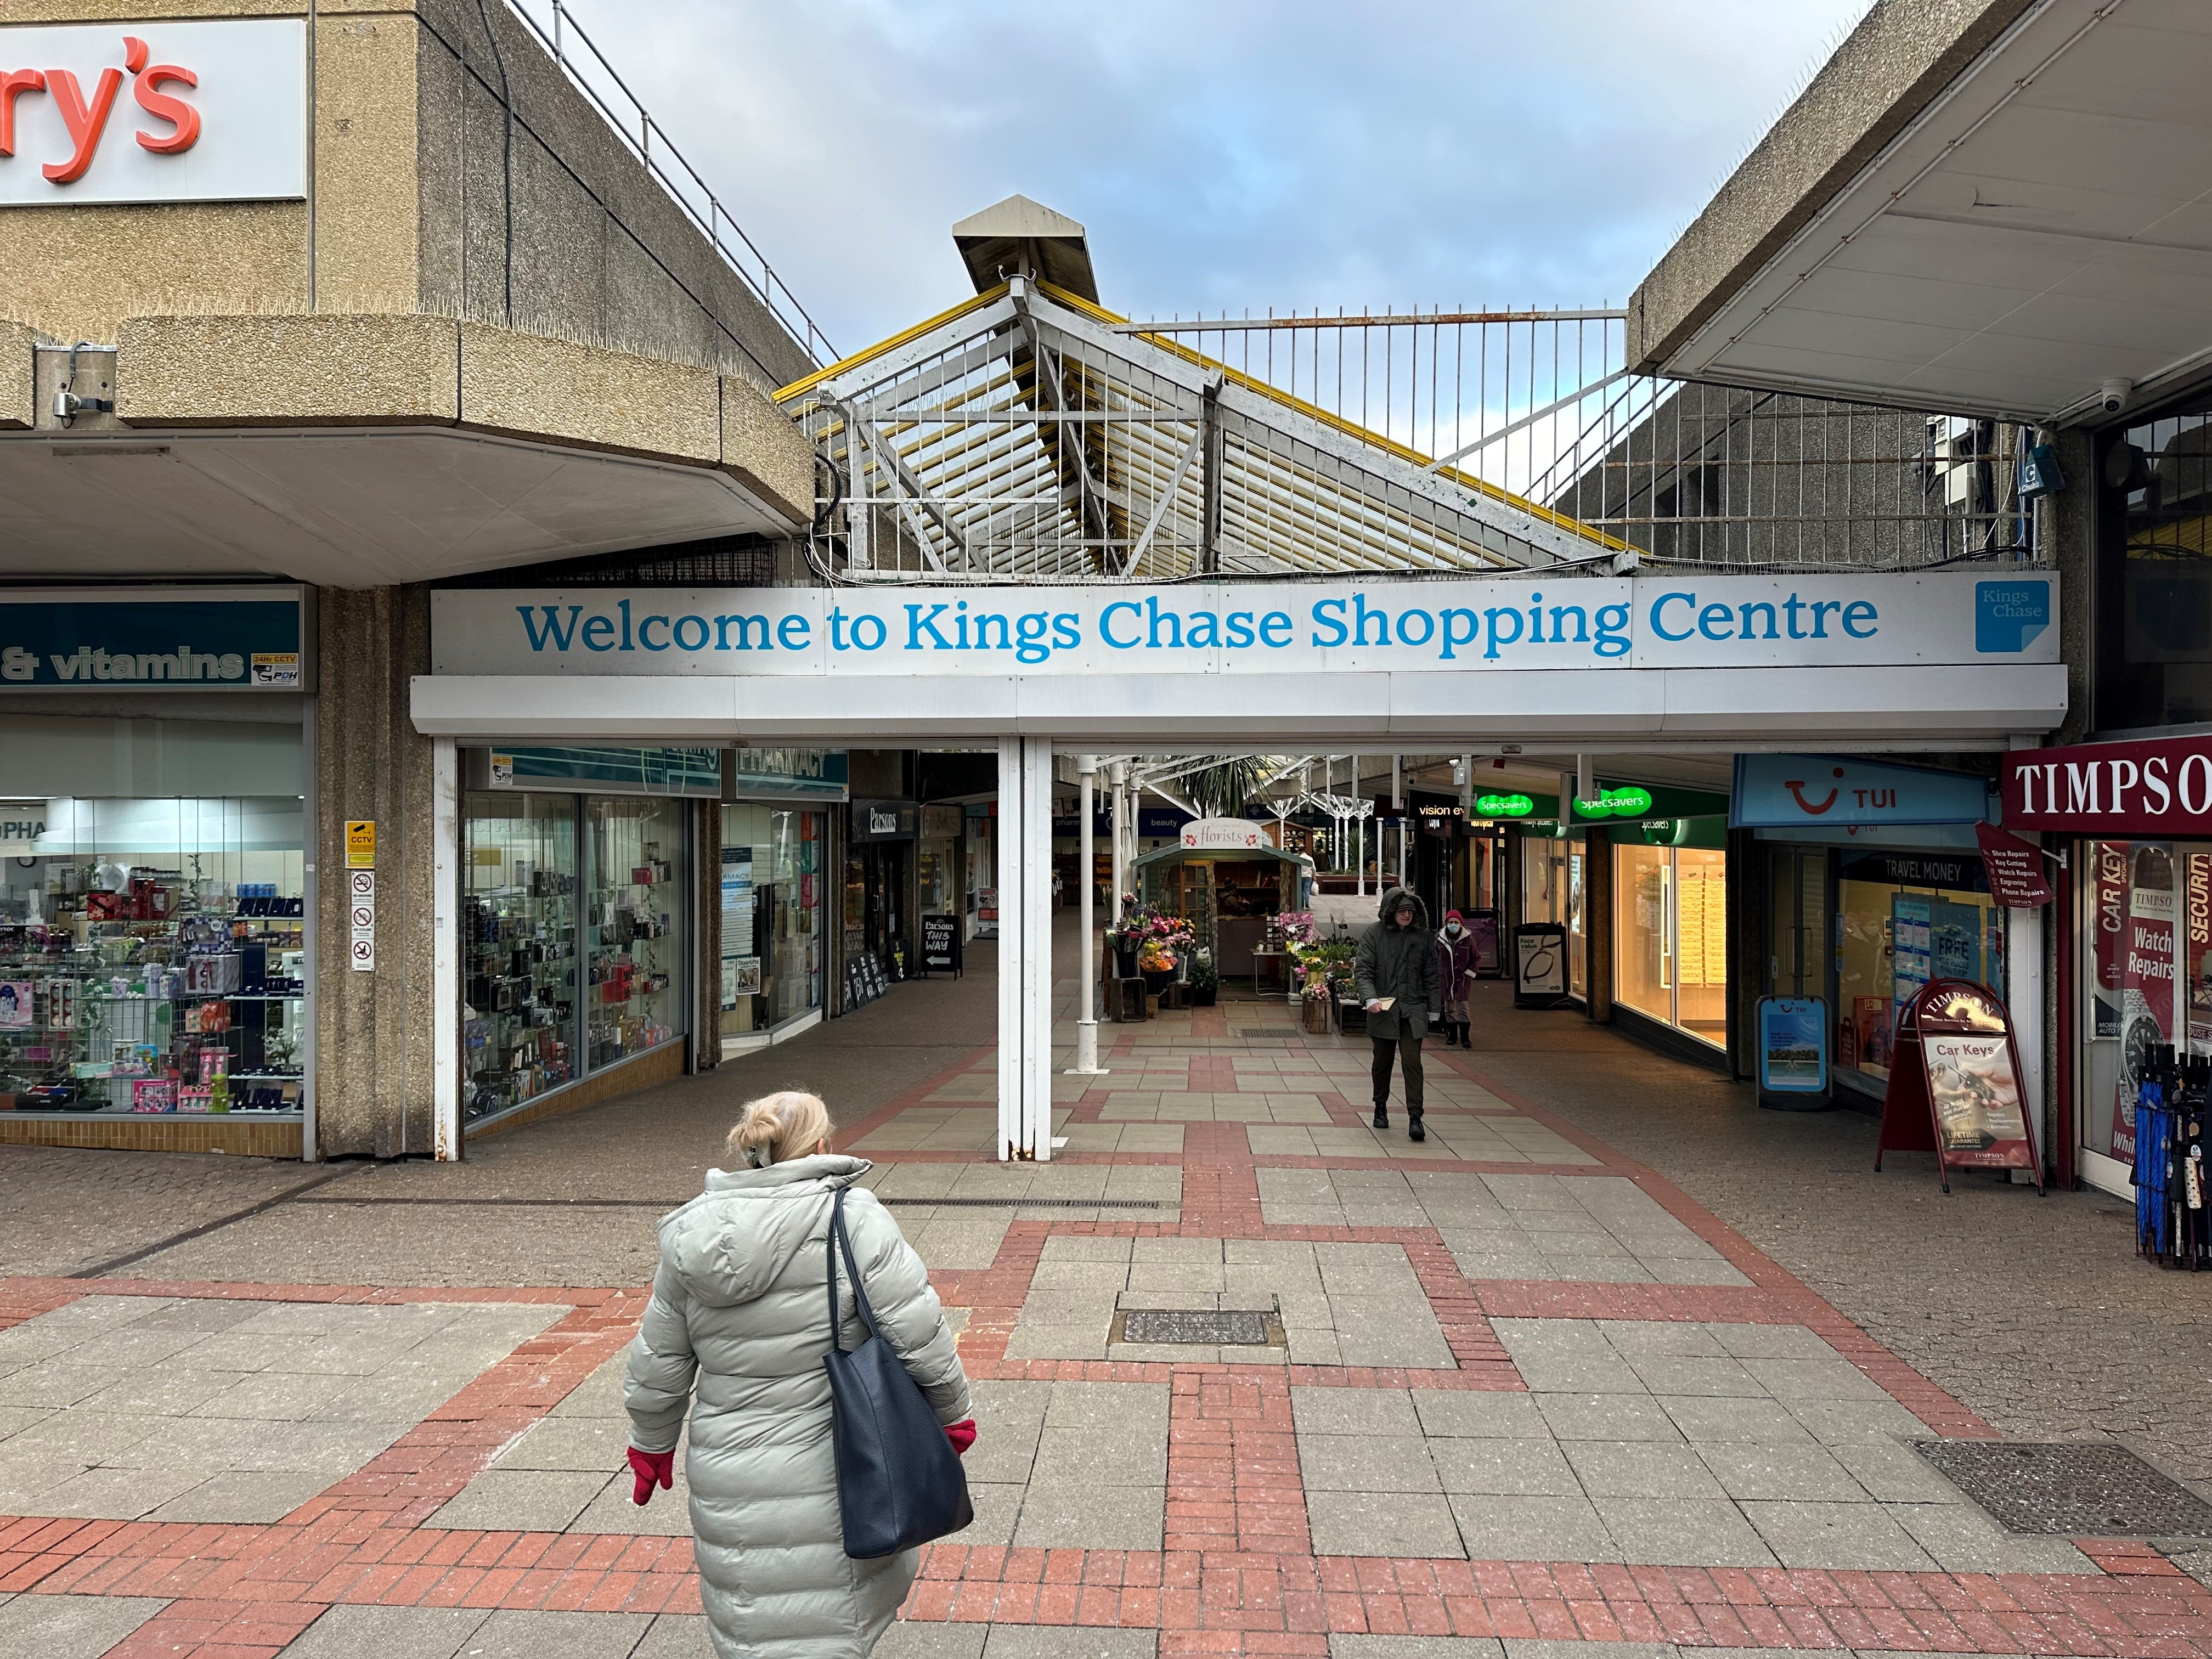 The Kings Chase Shopping Centre, purchased by South Gloucestershire Council, is the centre point of the High Street in Kingswood